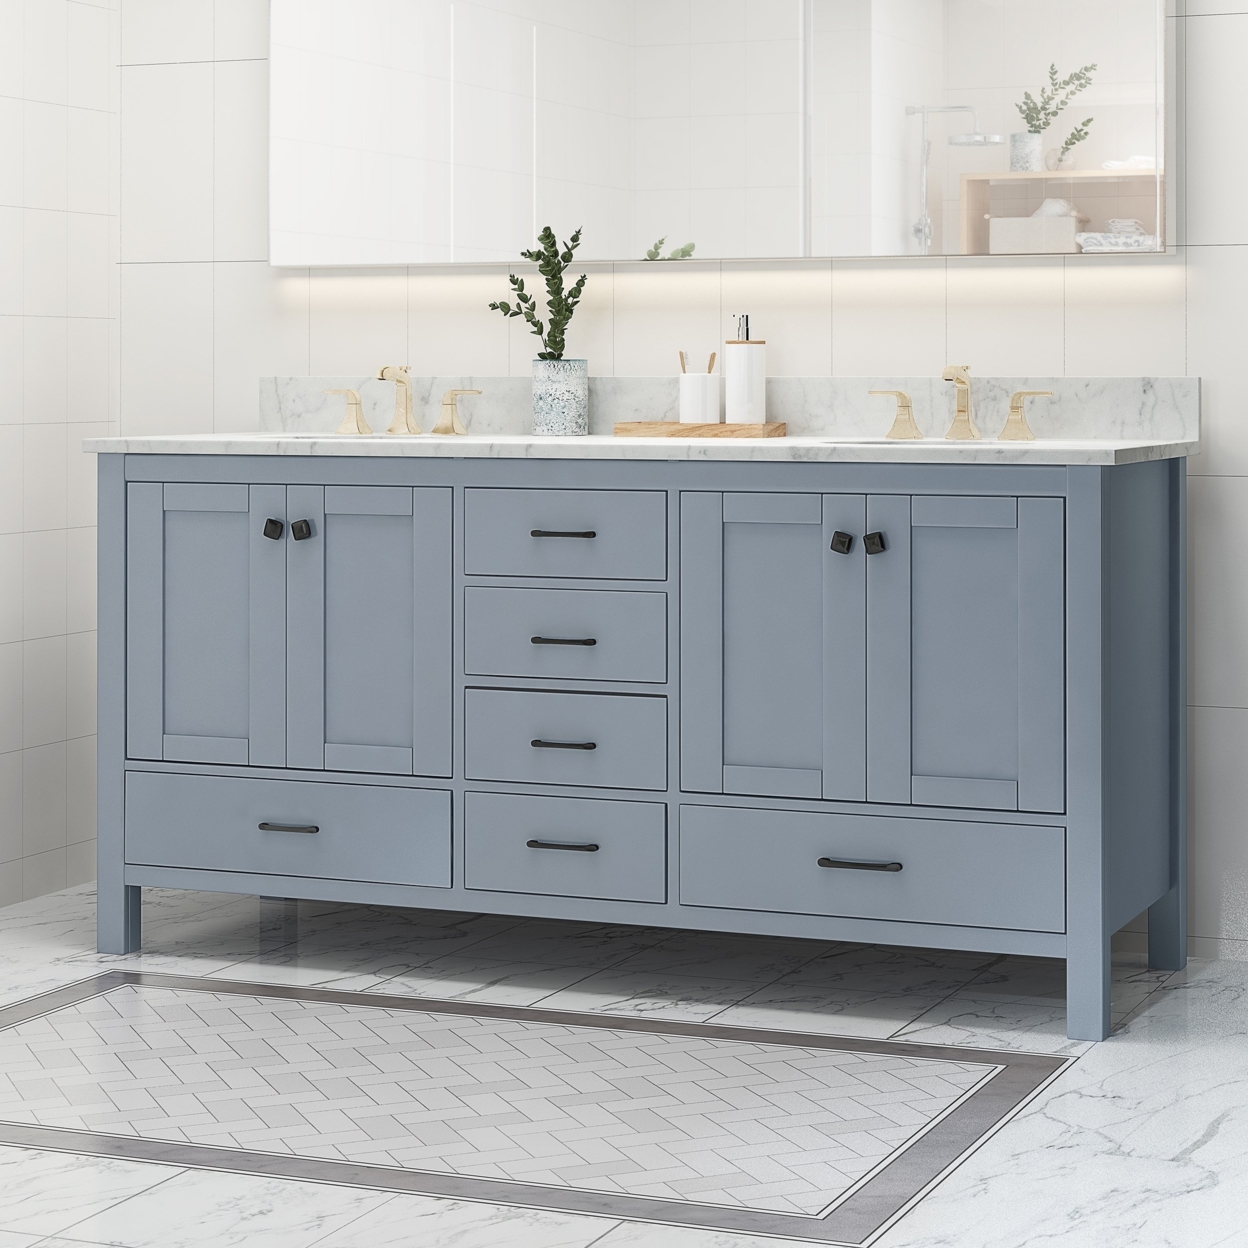 Laranne Contemporary 72 Wood Double Sink Bathroom Vanity With Marble Counter Top With Carrara White Marble - White